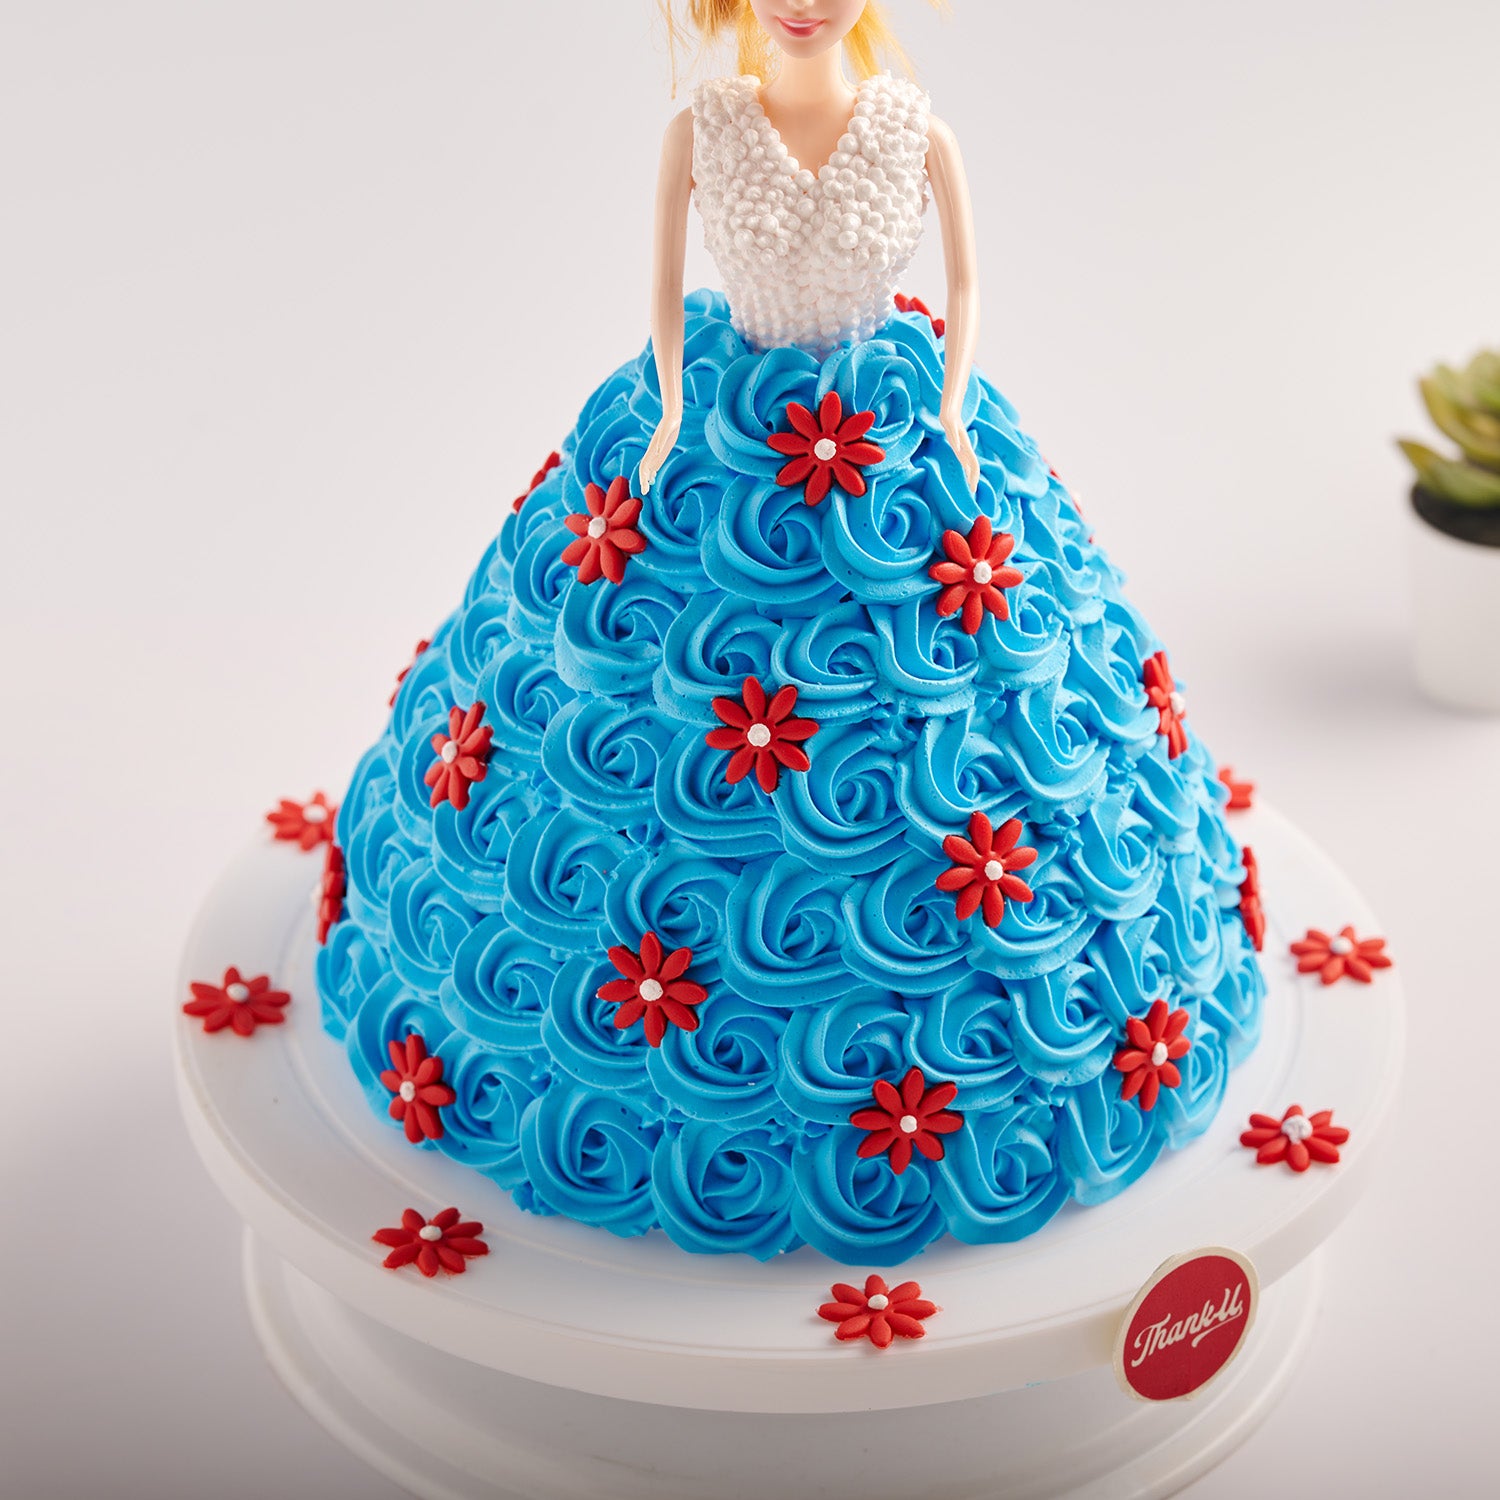 Pink with Blue Barbie Cake - Madras Bakery